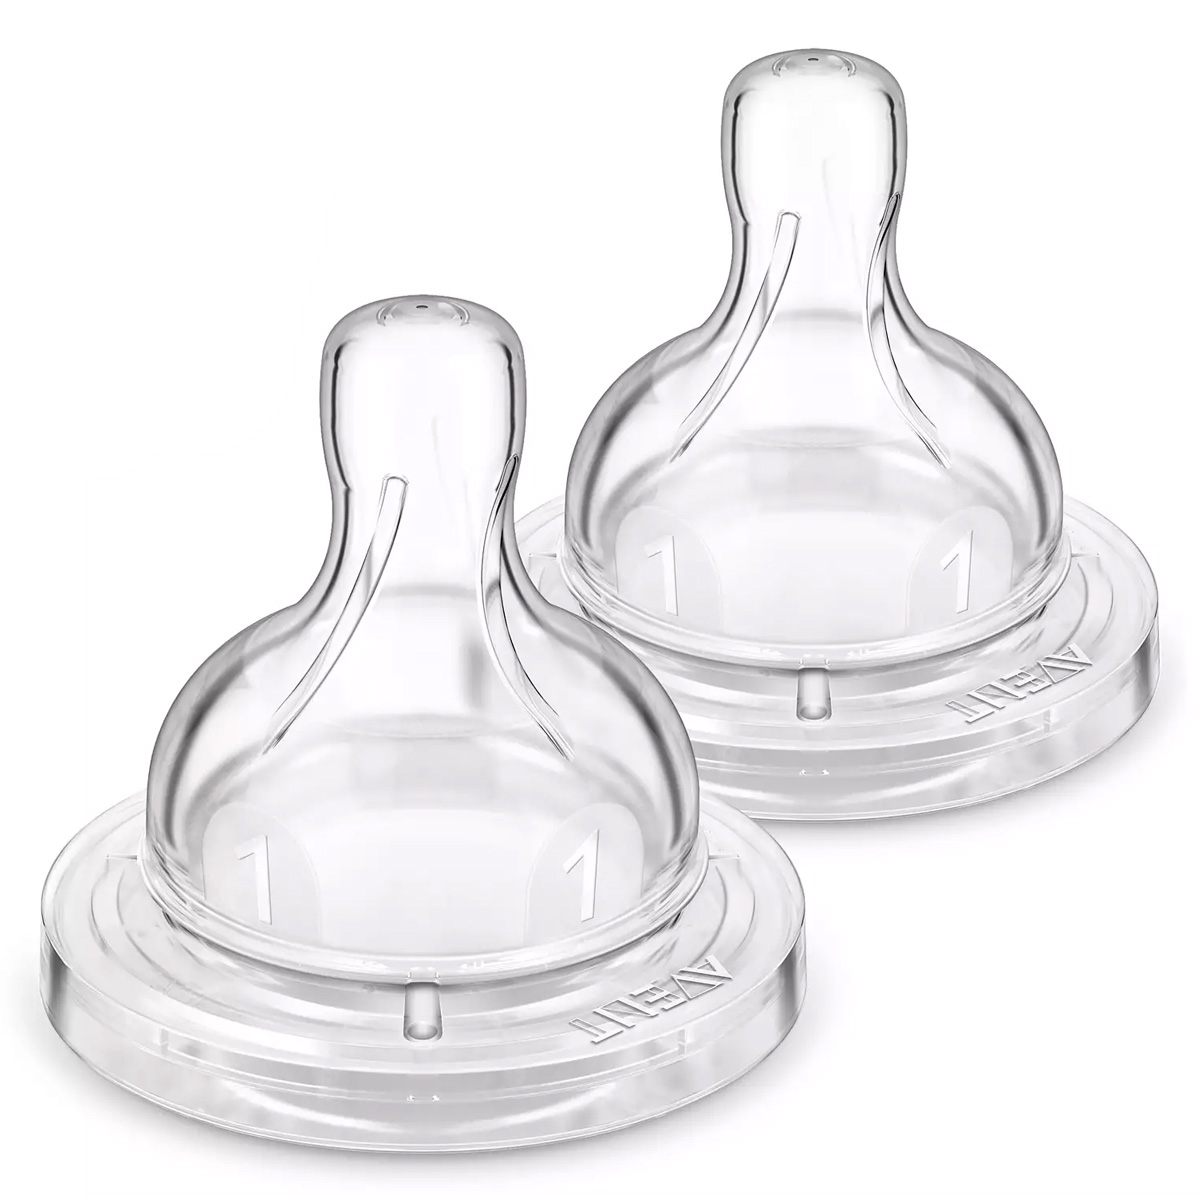 CLASSIC + TETINES ANTI COLIC SILICONE 3 mois+ Débit variable AVENT